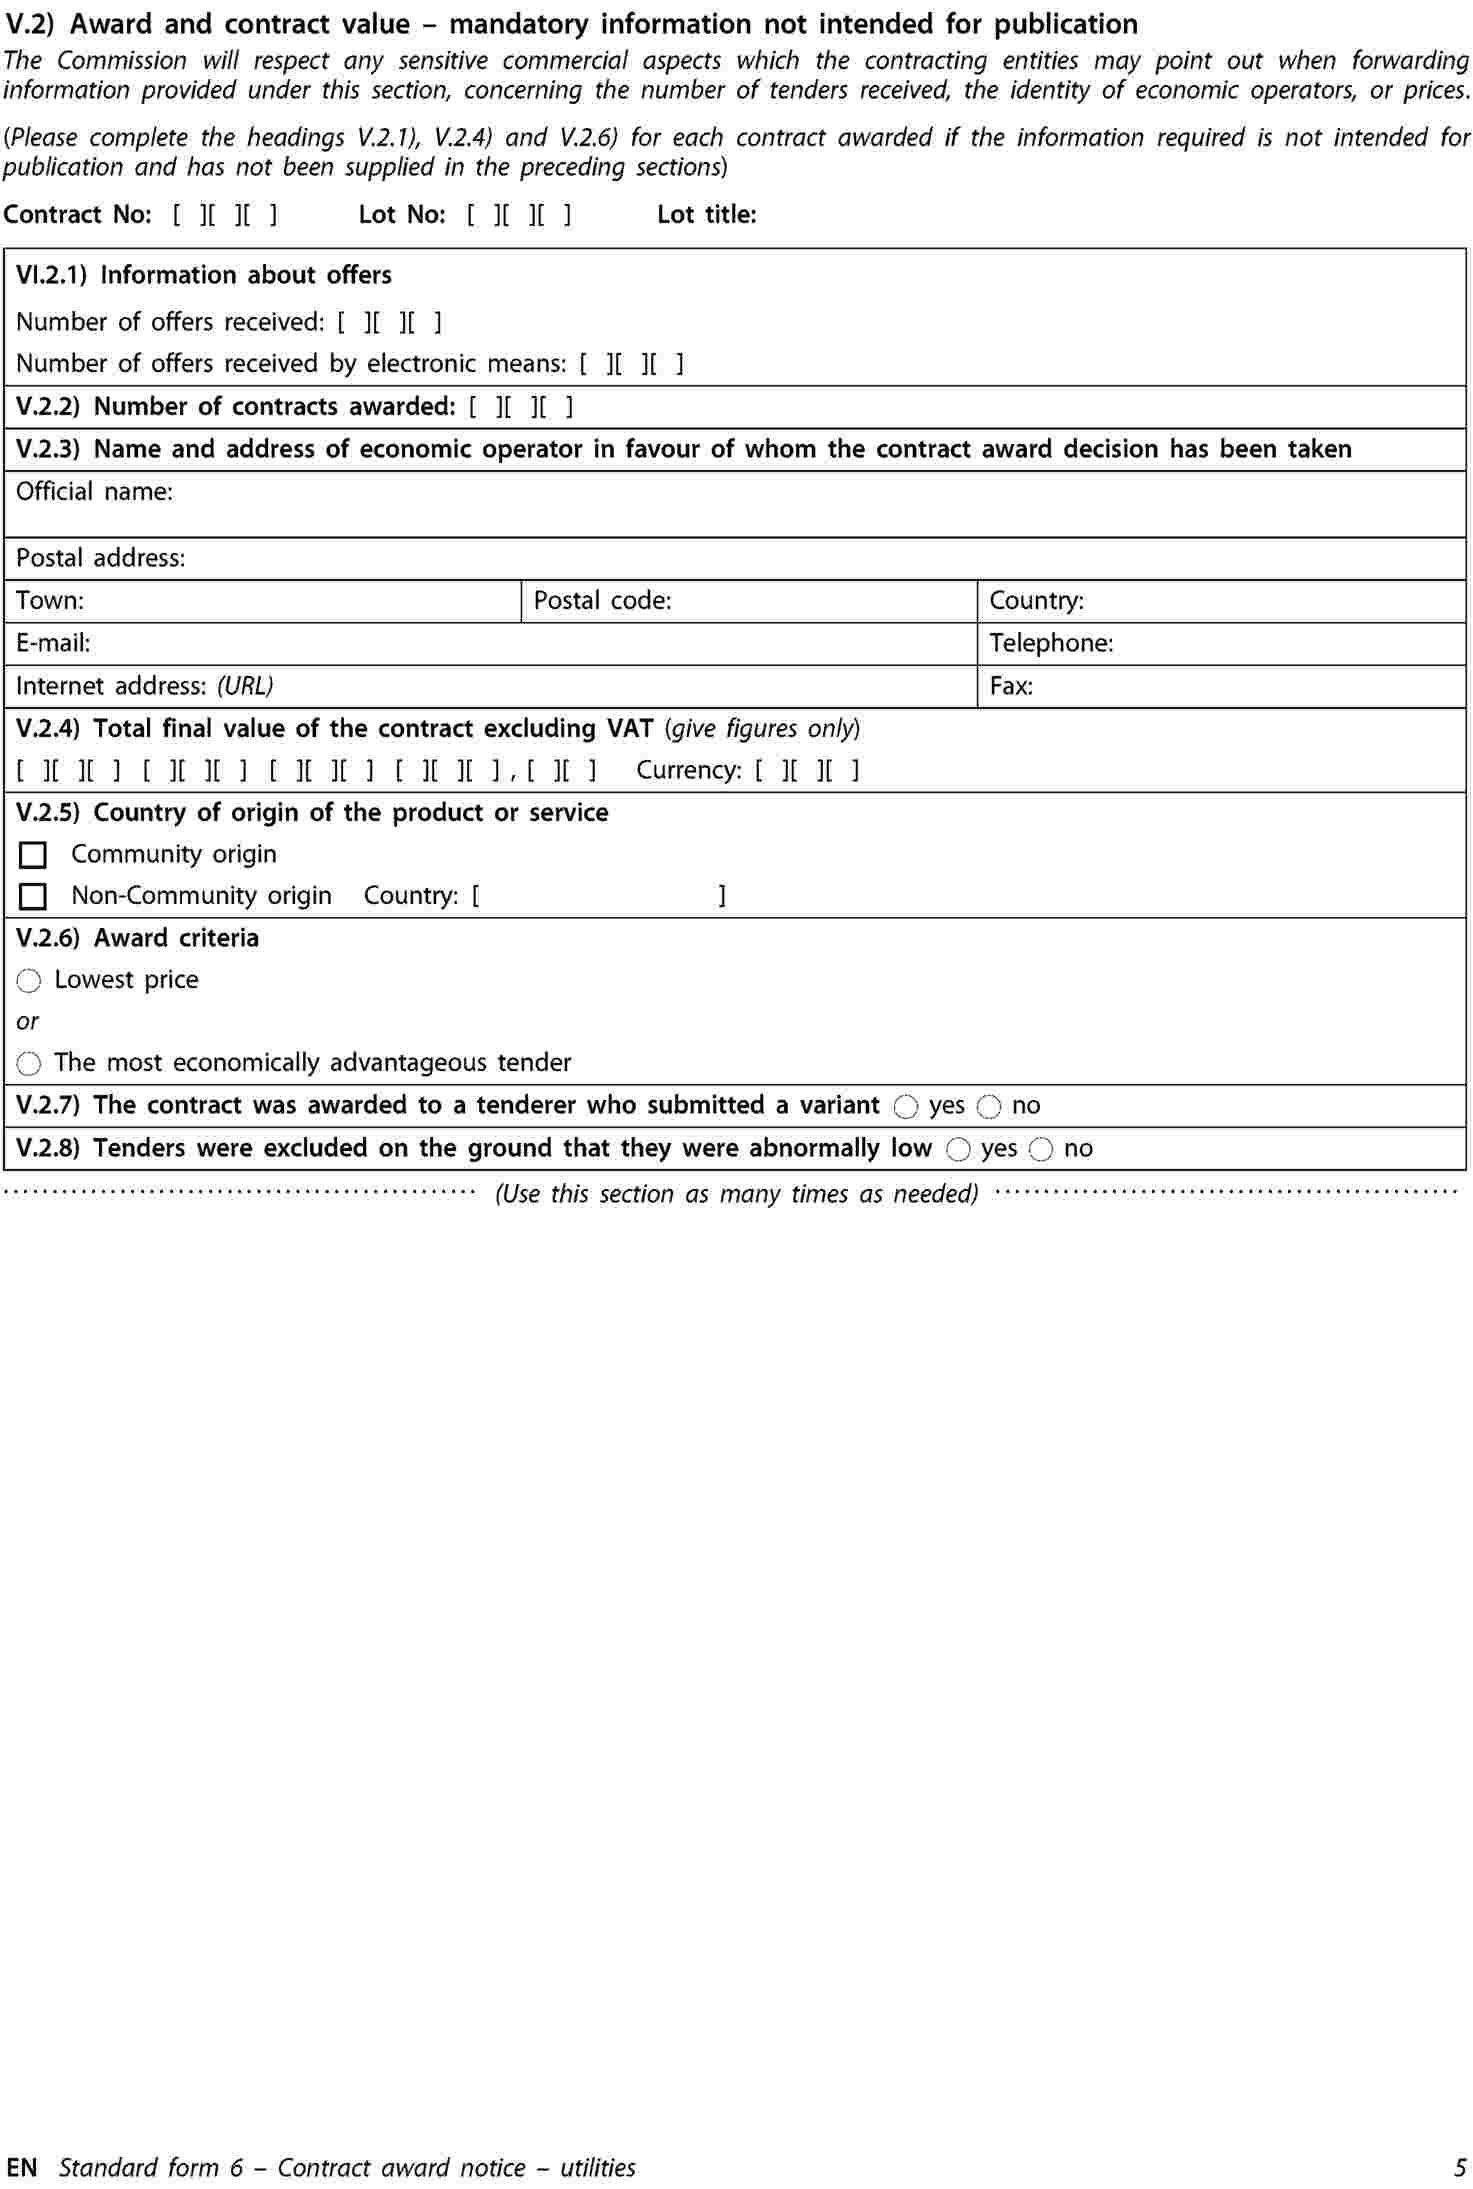 Permanent Partial Disability Ard Calculation Worksheet